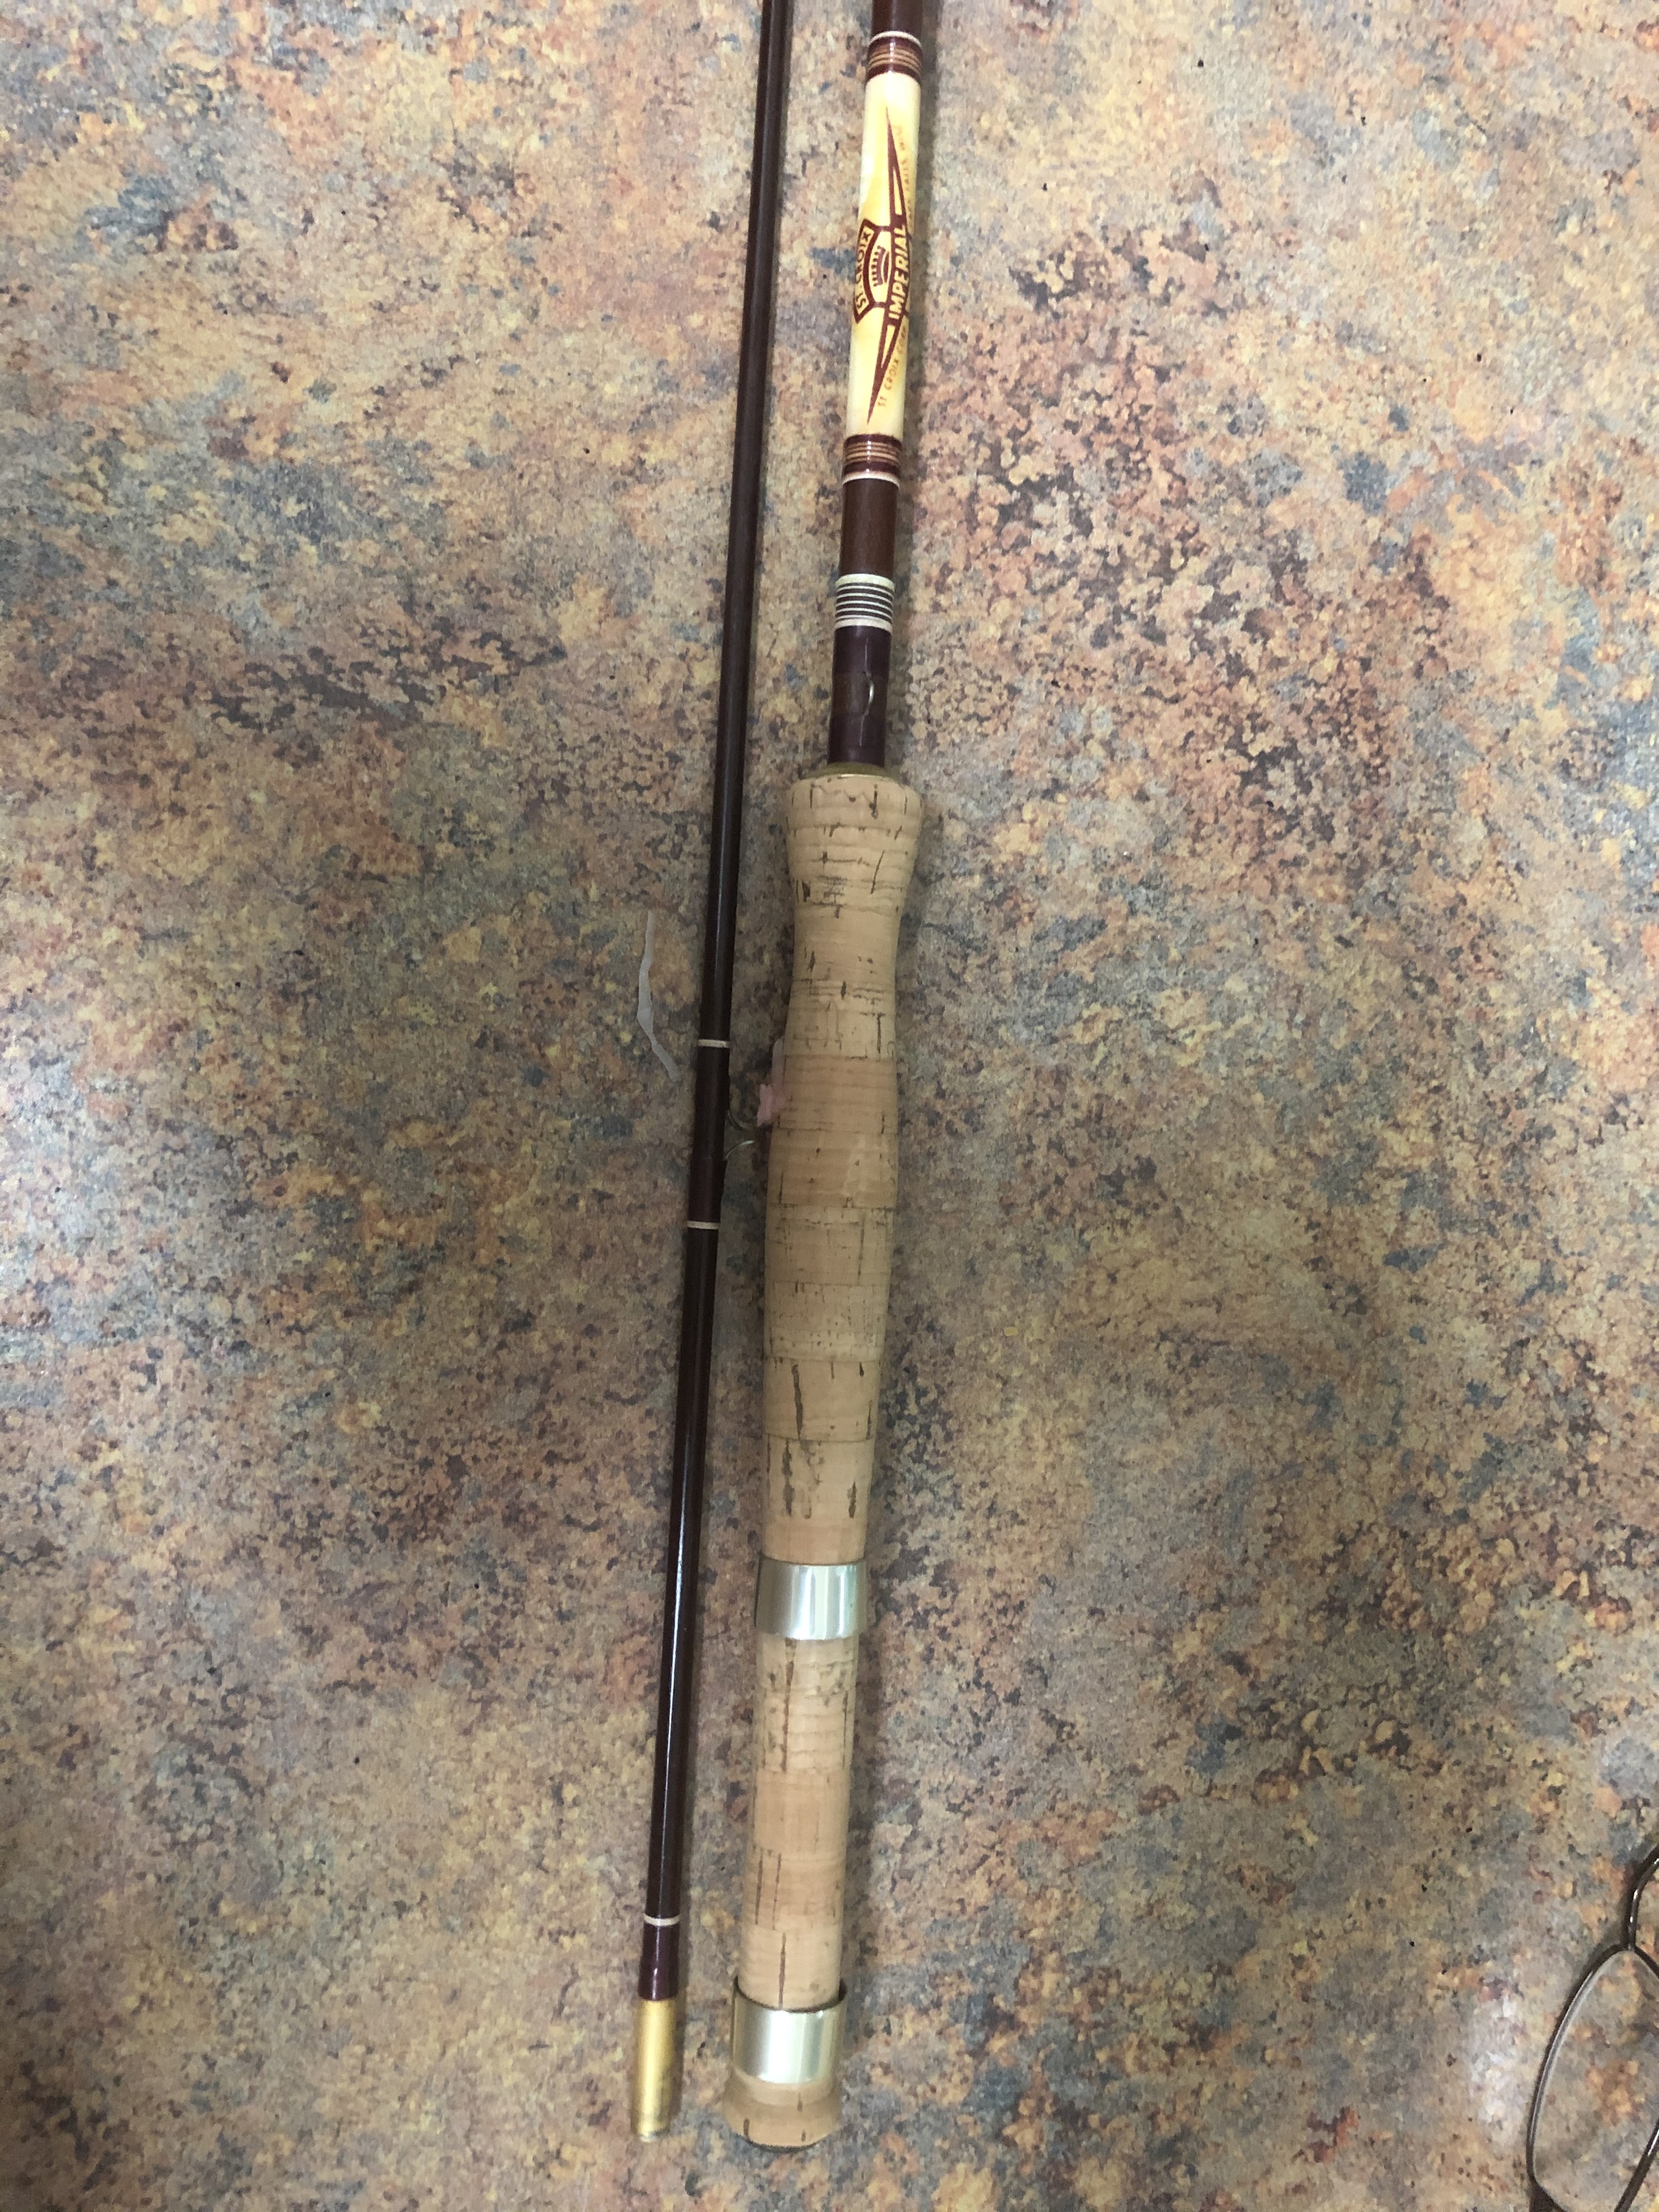 St Croix imperial light Collecting Fiberglass Fly Rods | Flyrodders